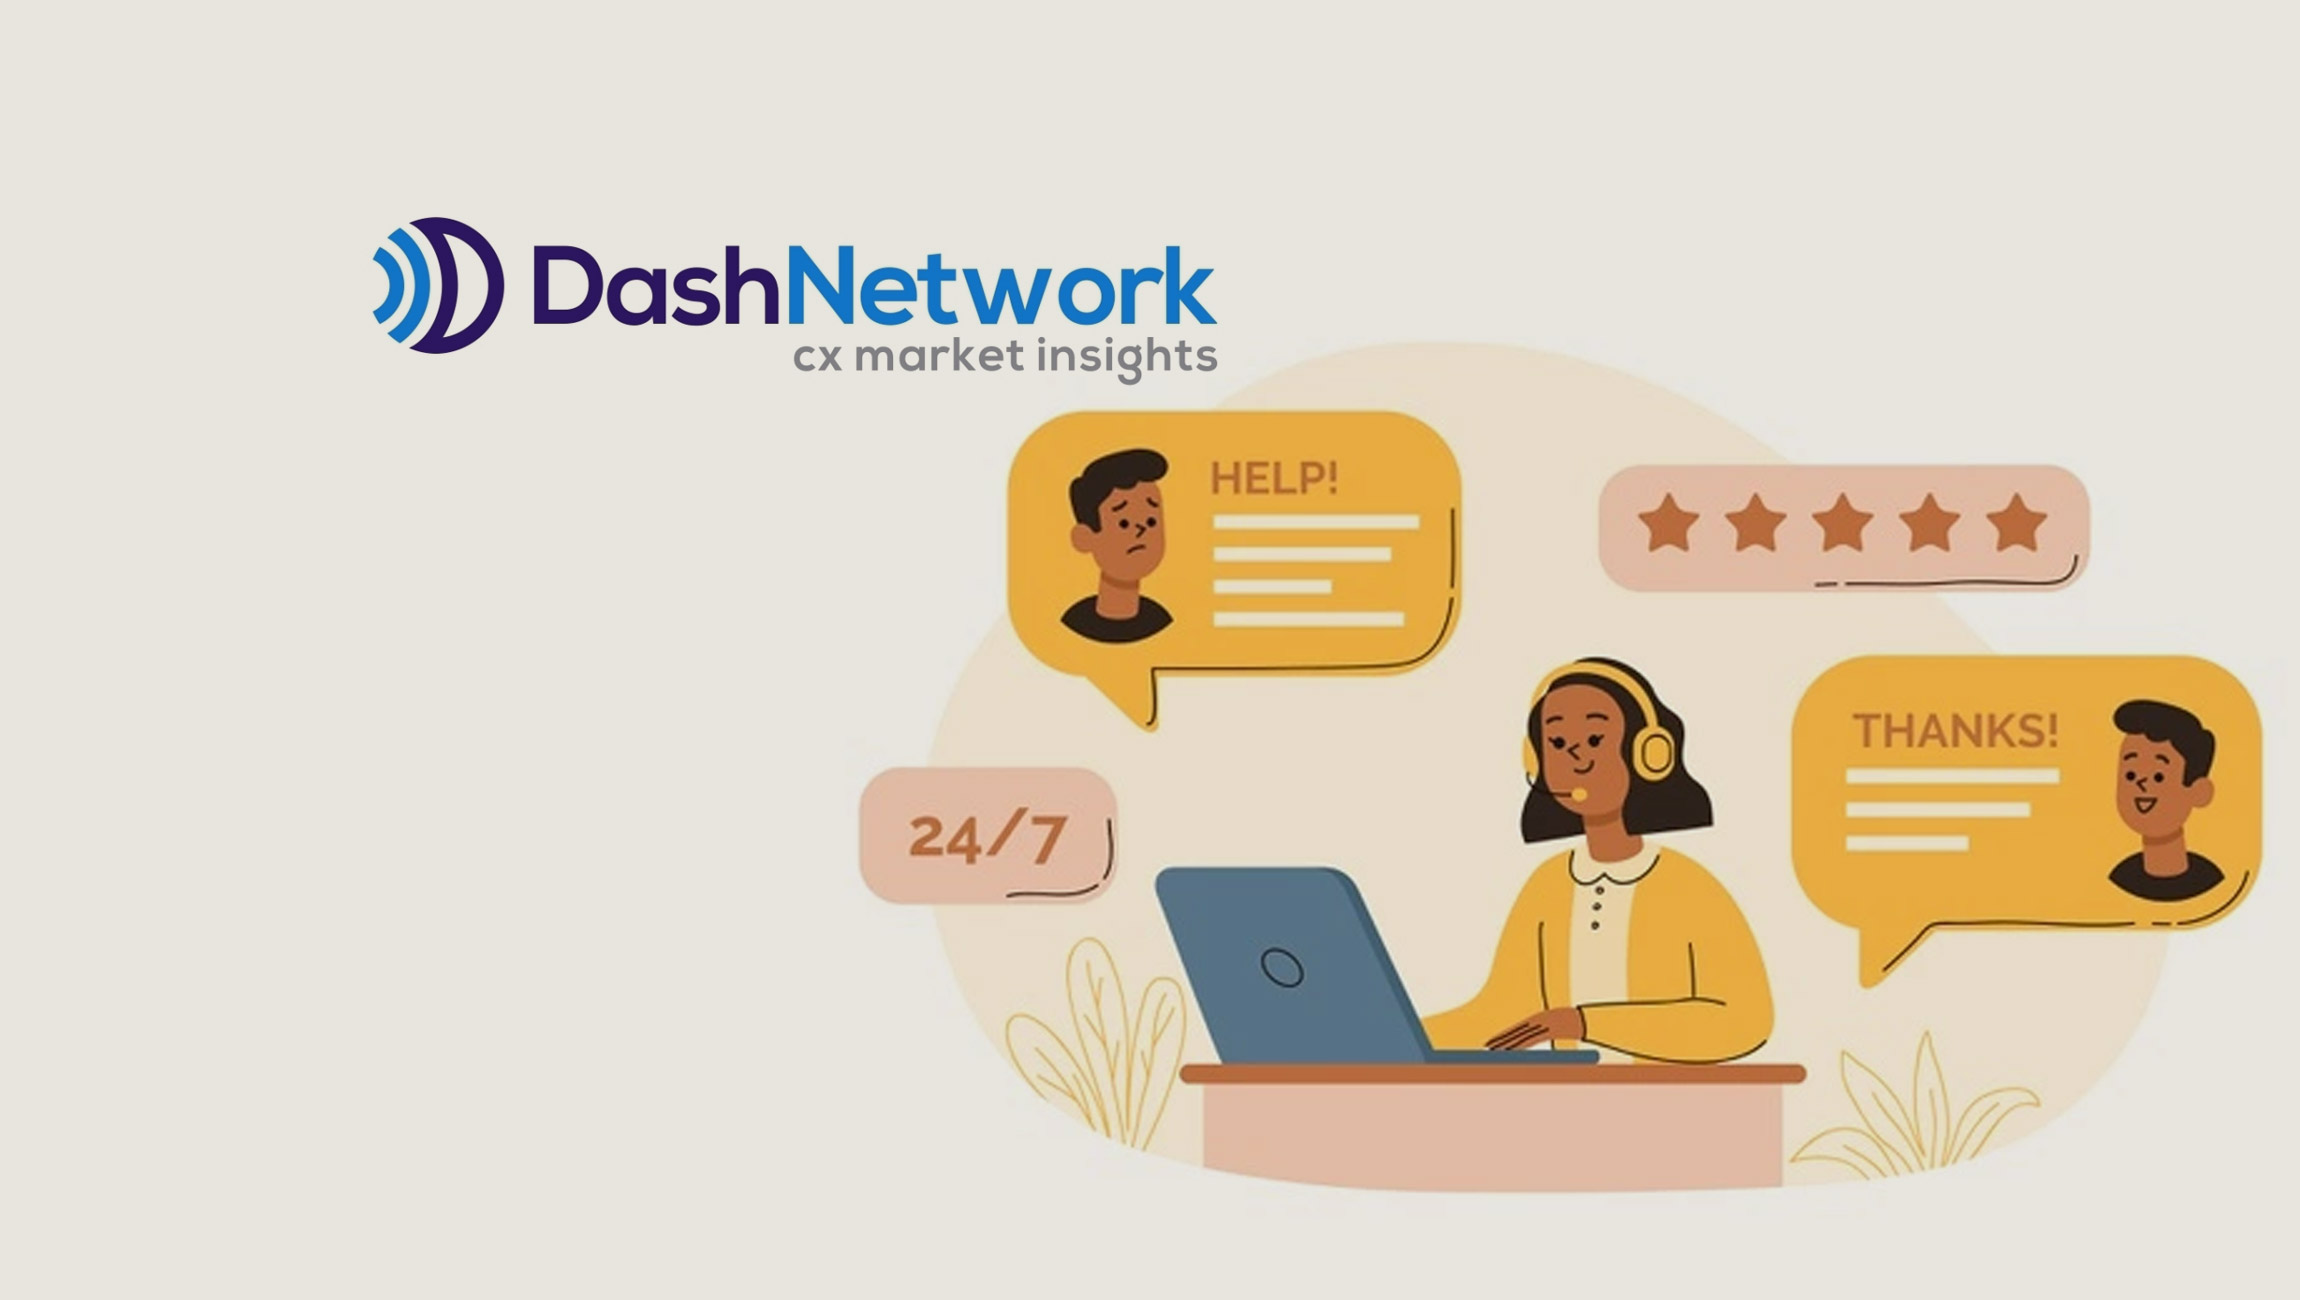 The Customer Experience Market in 2022 Will Continue to Be Heavily Influenced by Labor Issues, Supply Chain Disruptions, and Health and Safety Concerns, According to Dash Research